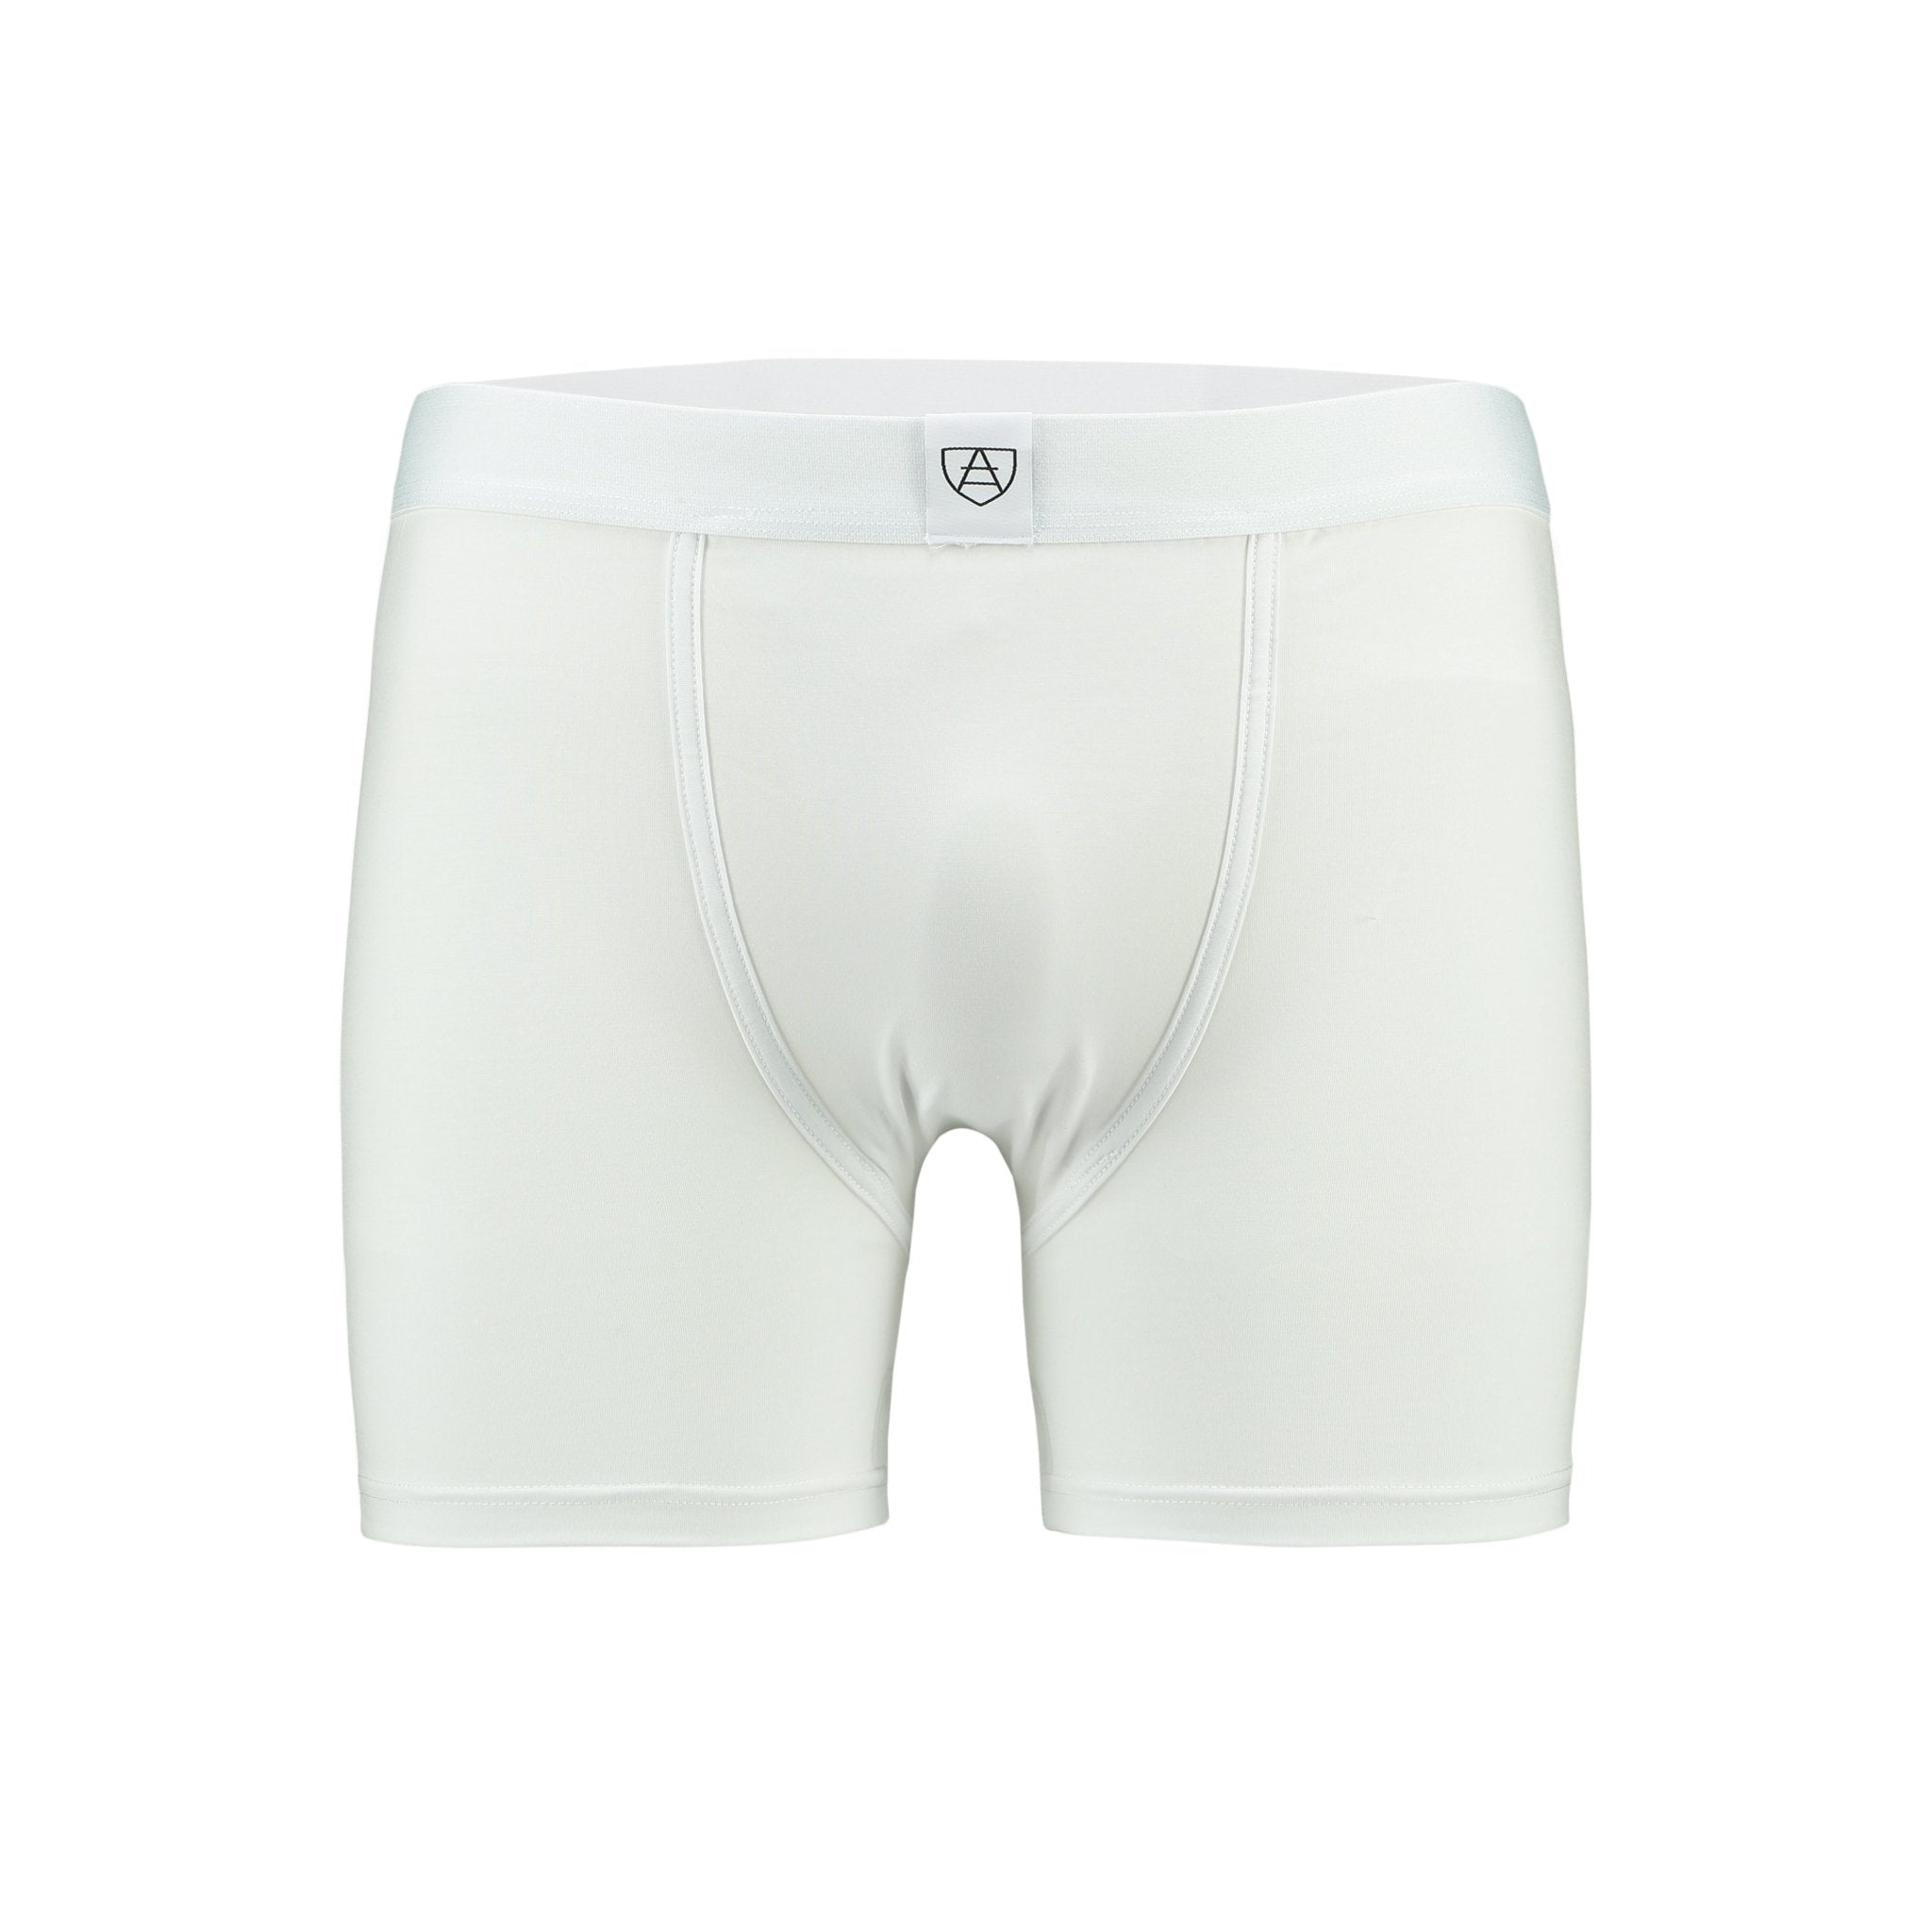 White All-in-One Packing Boxers